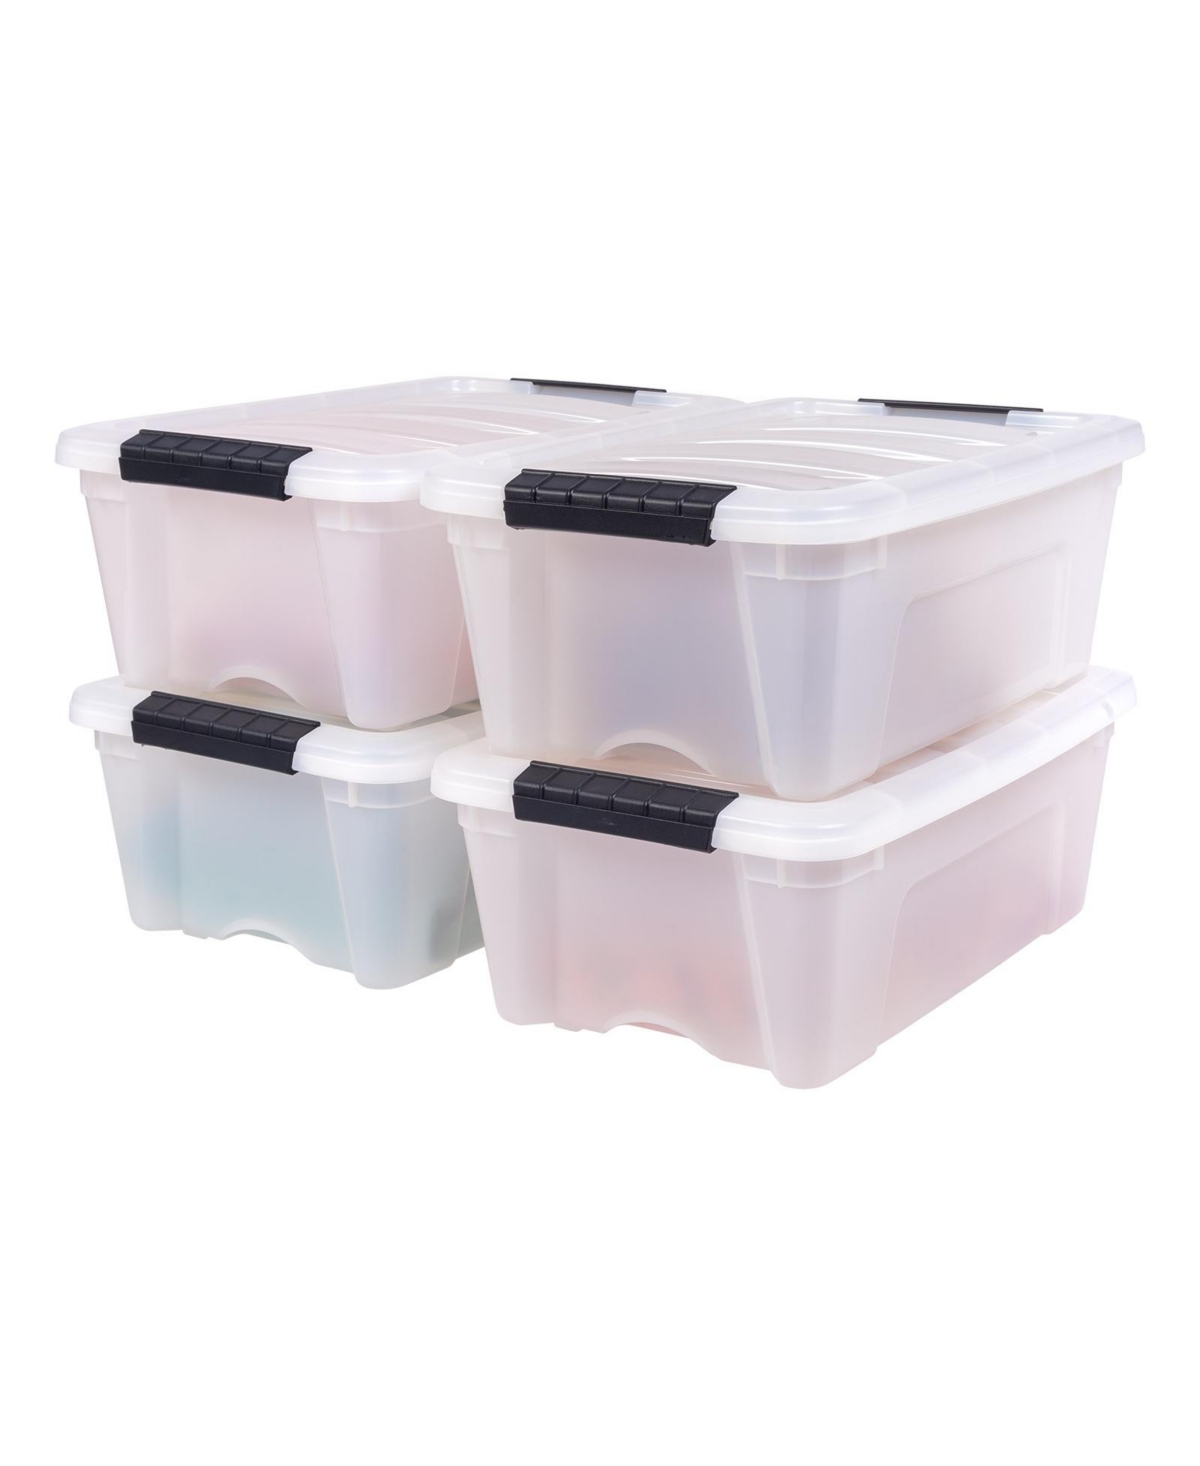 13 Qt Stackable Plastic Storage Bins with Lids, 4 Pack - Bpa-Free, Made in Usa - Discreet Organizing Solution, Latches, Durable Nestable Cont